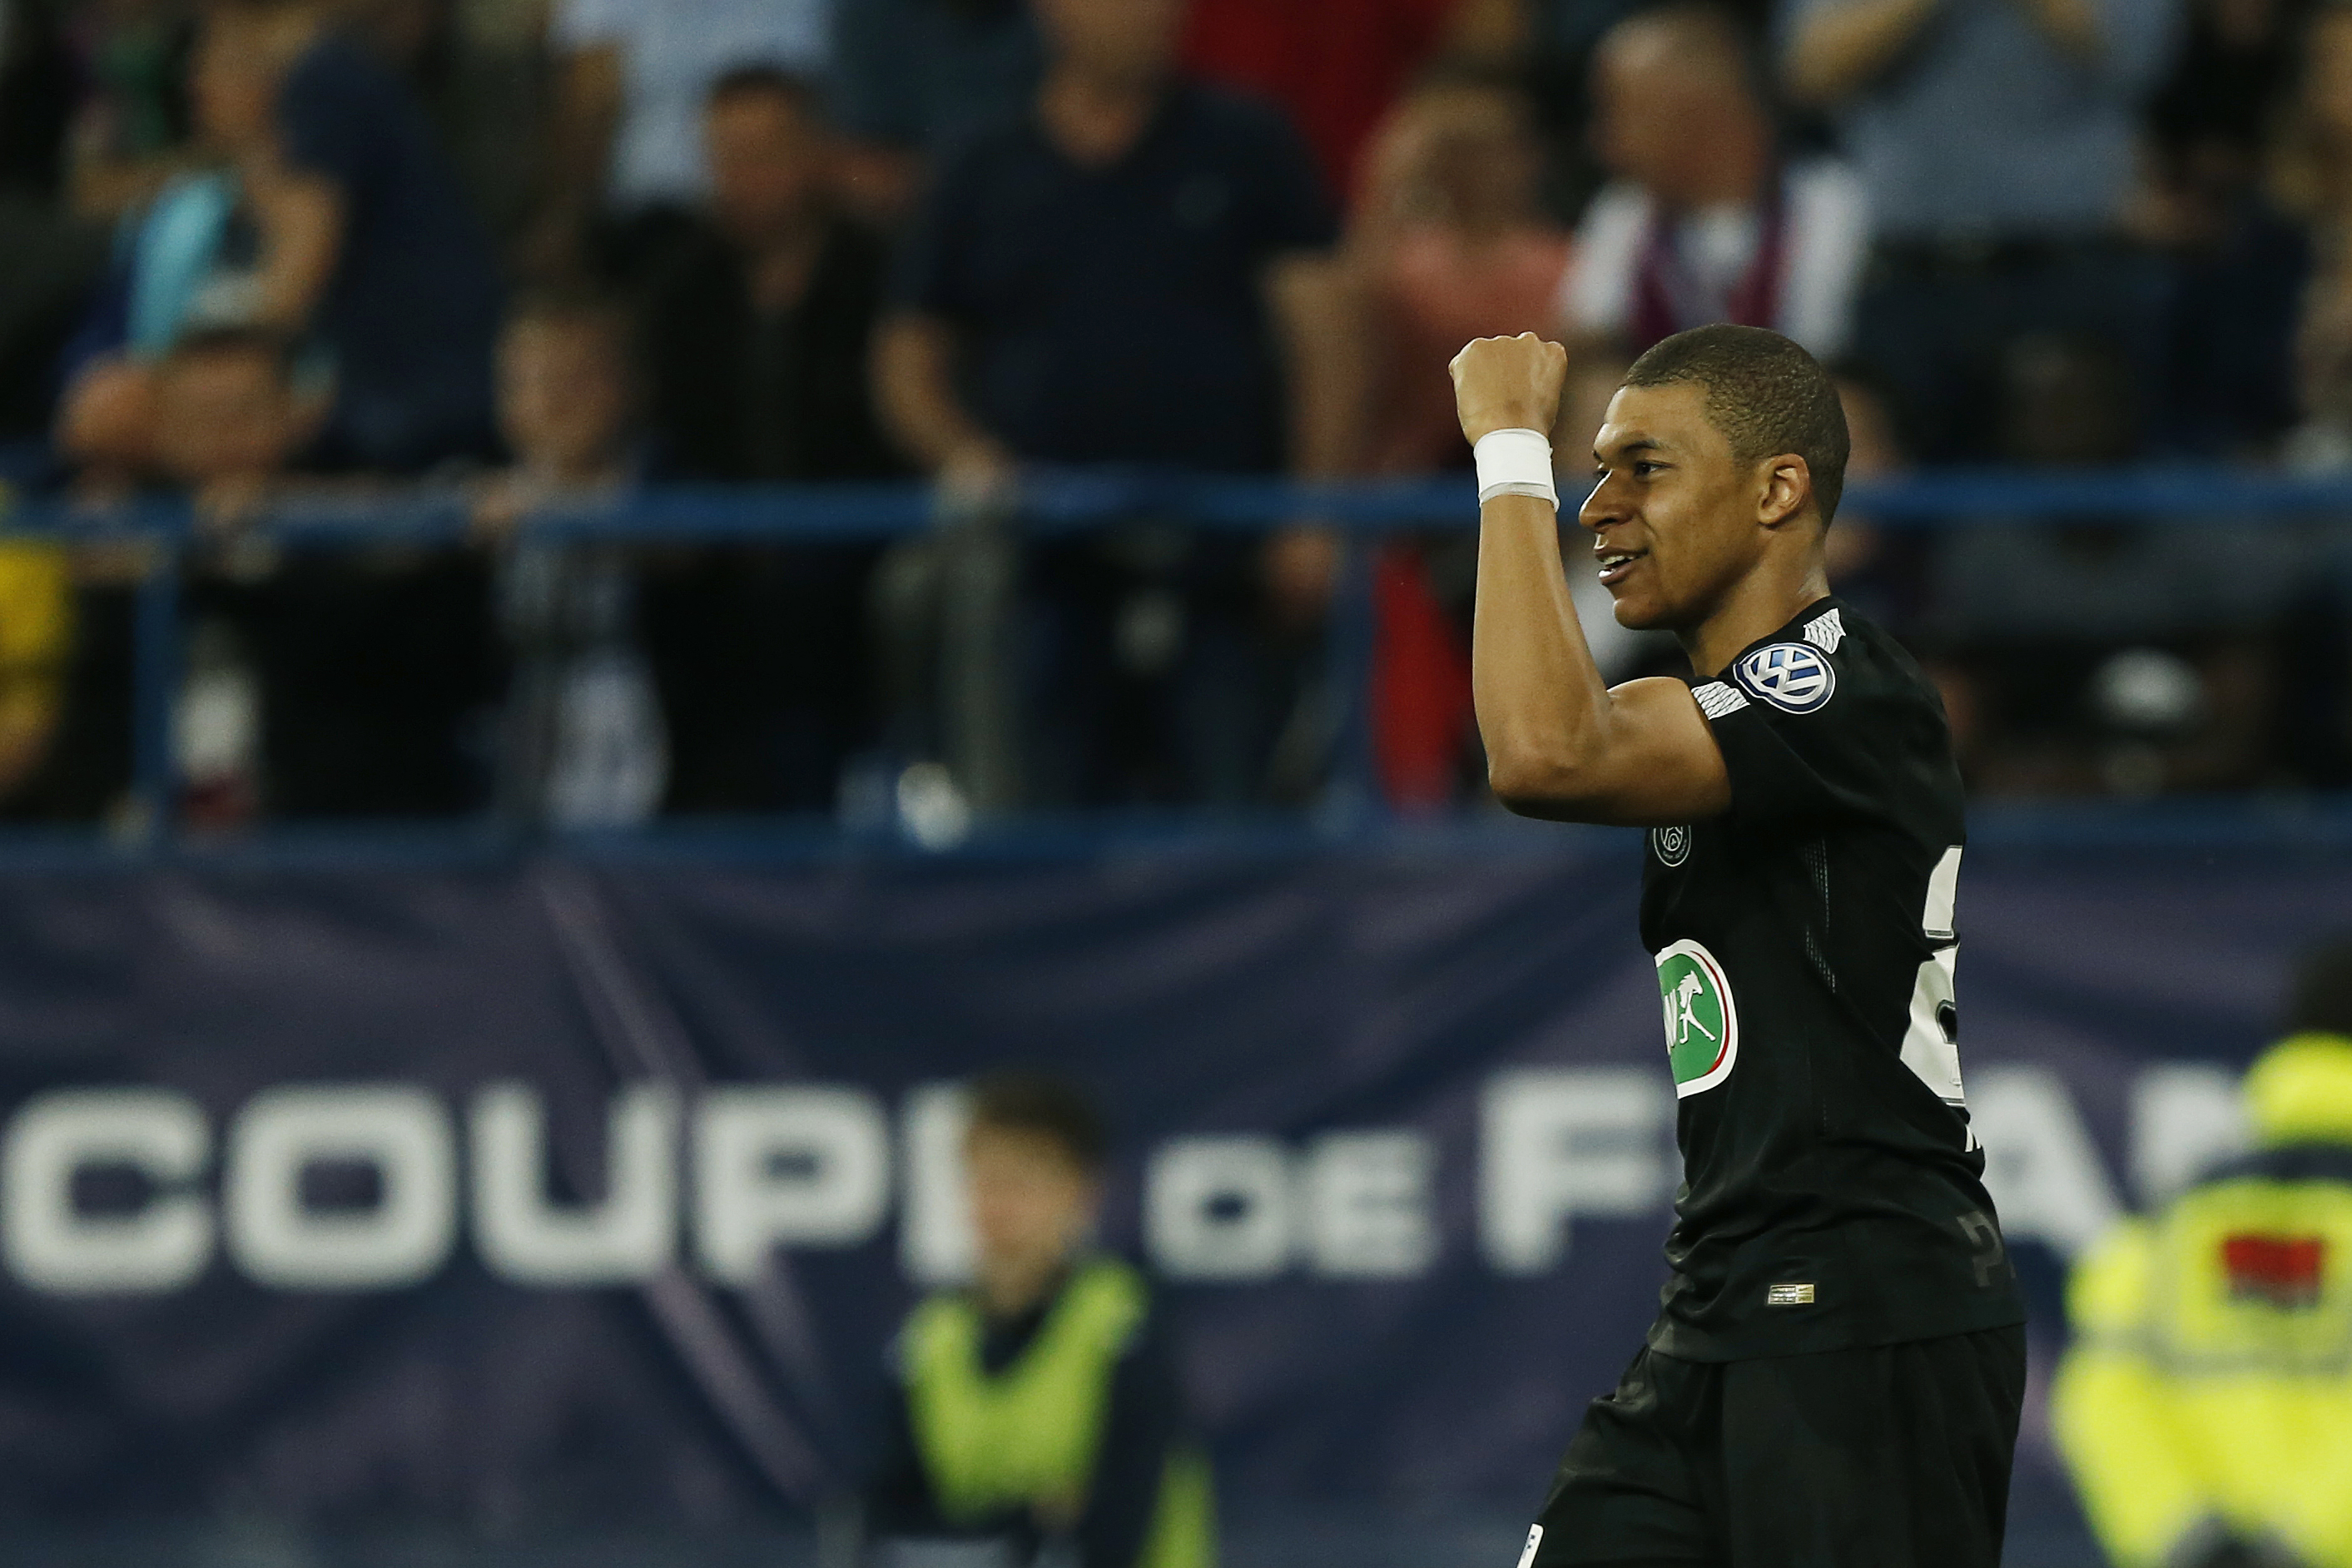 Paris Saint-Germain's French forward Kylian Mbappe reacts after scoring during the French cup semi-final match between Caen (SMC) and Paris Saint-Germain (PSG) on April 18, 2018 at the Michel-d'Ornano stadium in Caen, northwestern France. / AFP PHOTO / CHARLY TRIBALLEAU        (Photo credit should read CHARLY TRIBALLEAU/AFP/Getty Images)